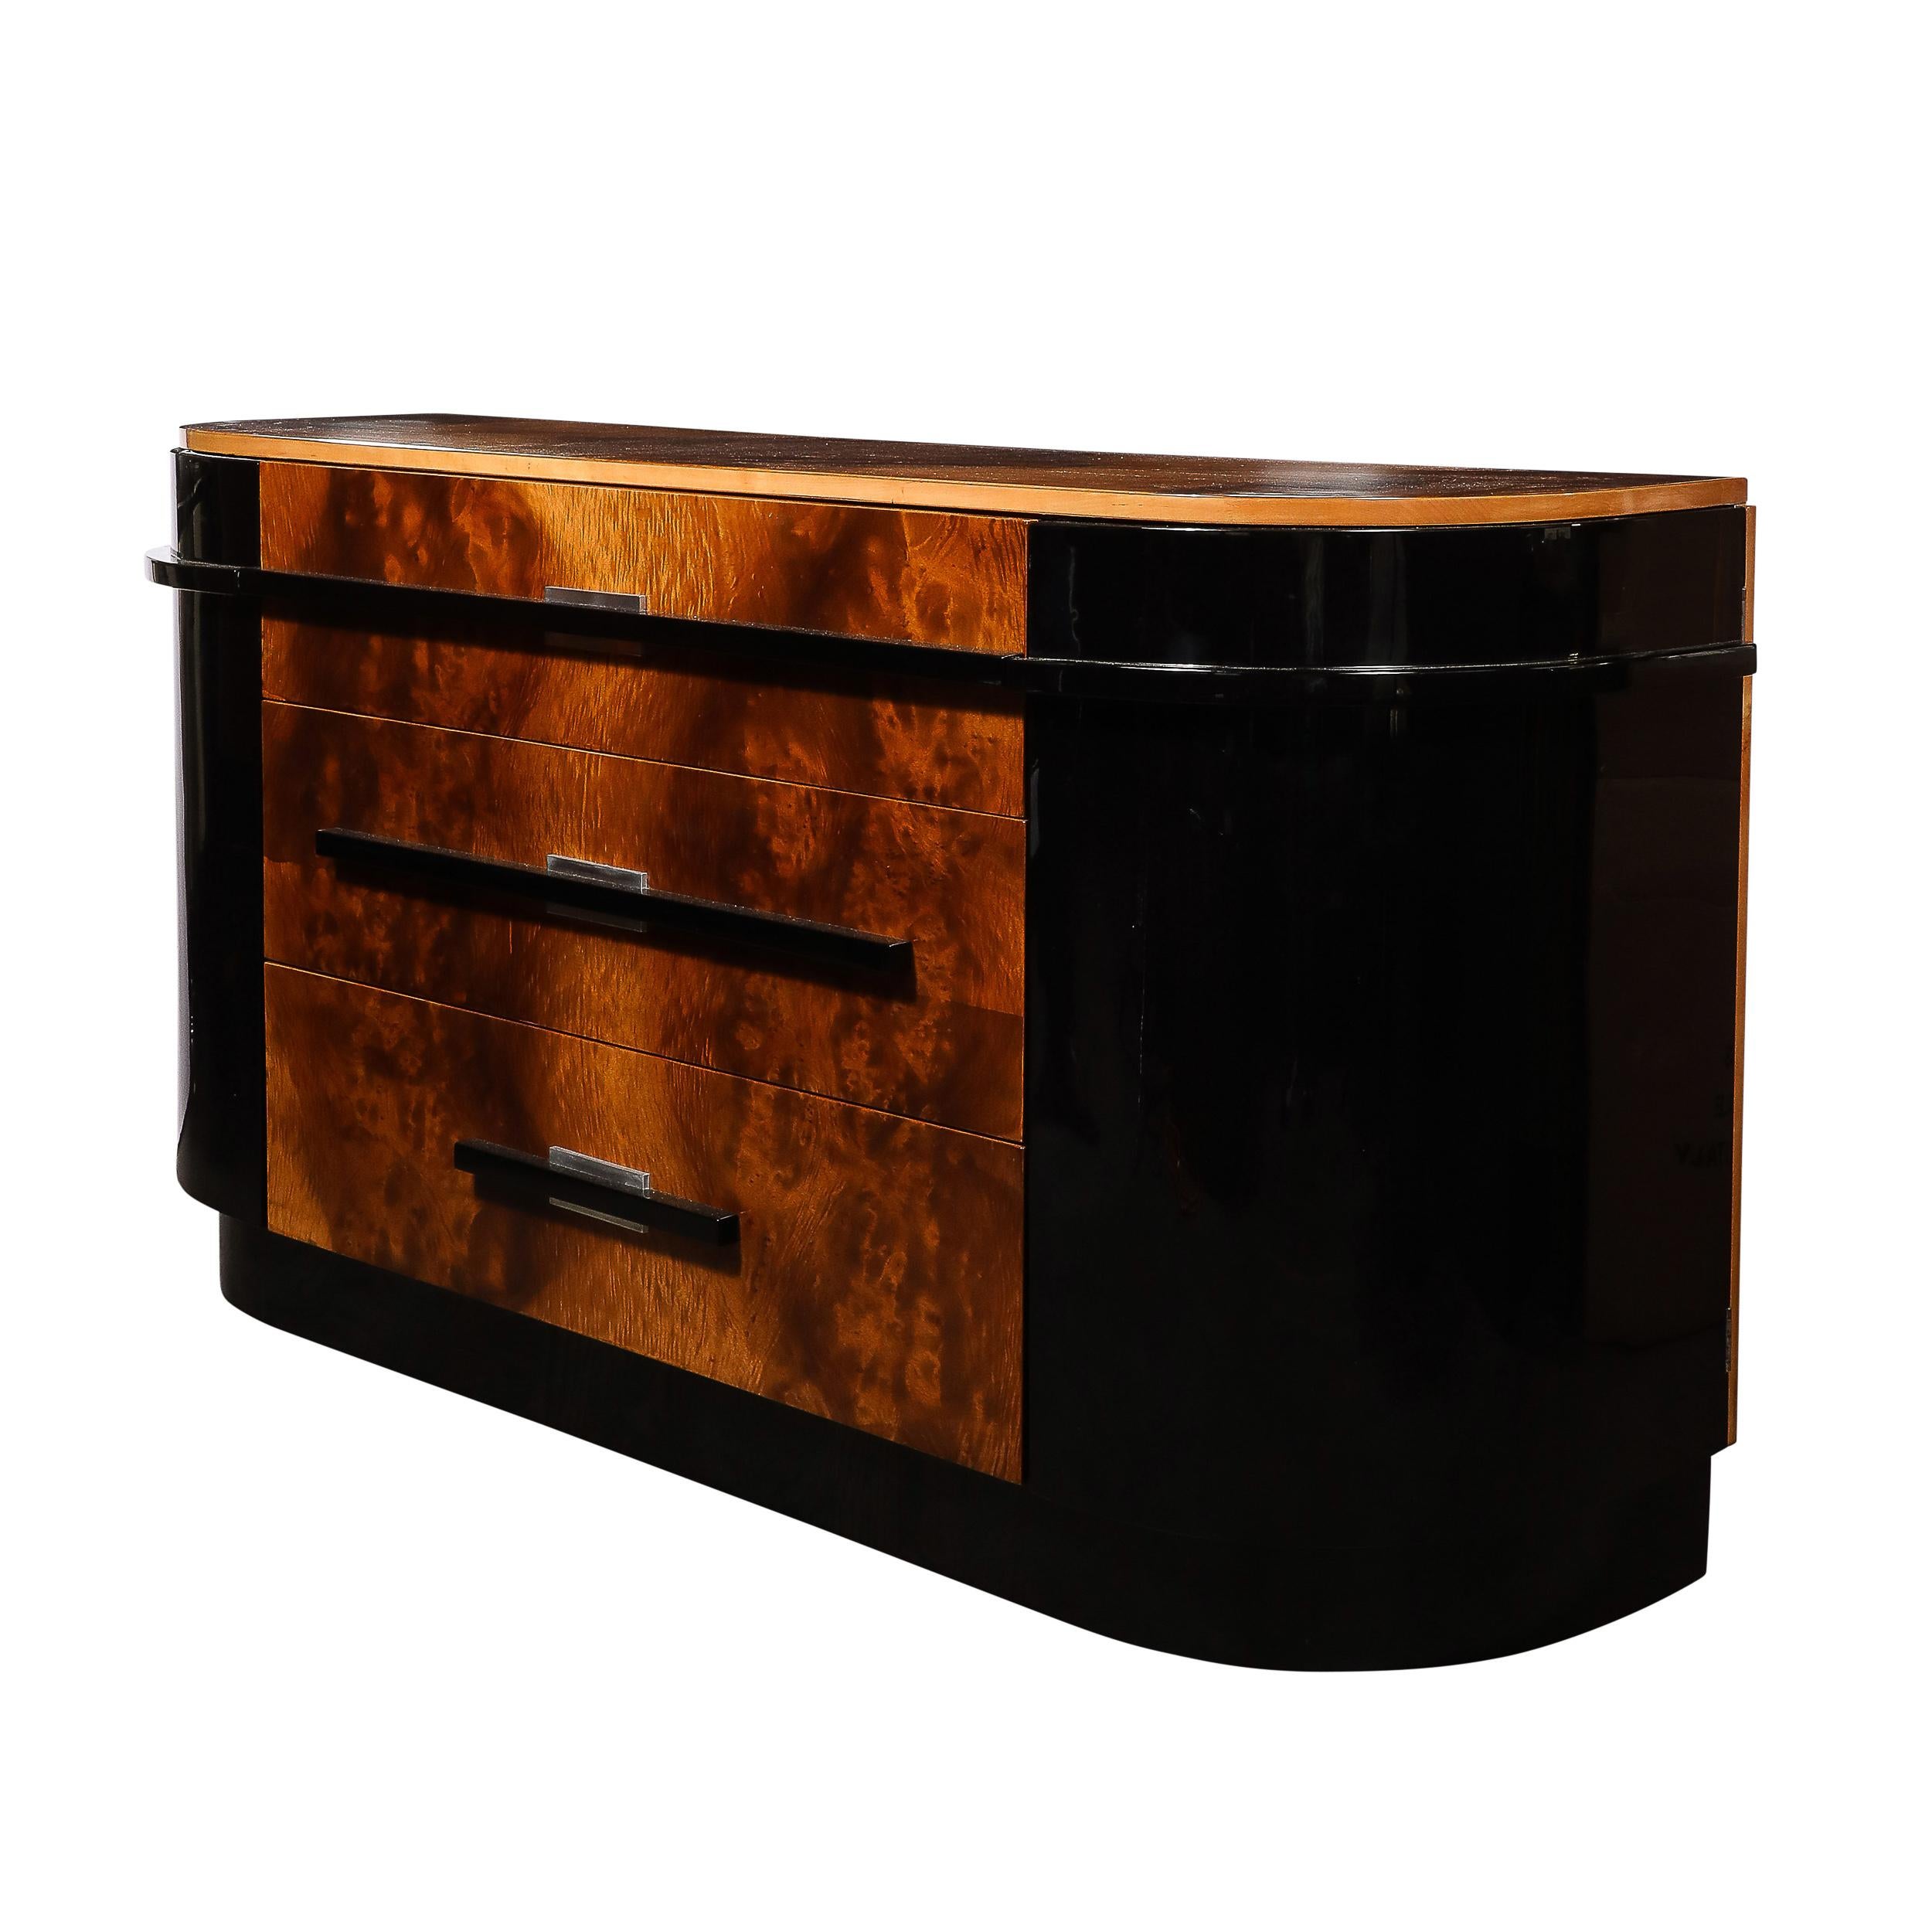 This highly unique and stunning Art Deco Streamlined Machine Age Sideboard in Burled Walnut & Black Lacquer w/ Aluminum Pulls is by the esteemed designer Donald Deskey for the Hastings Company and originates from the United States, Circa 1935.